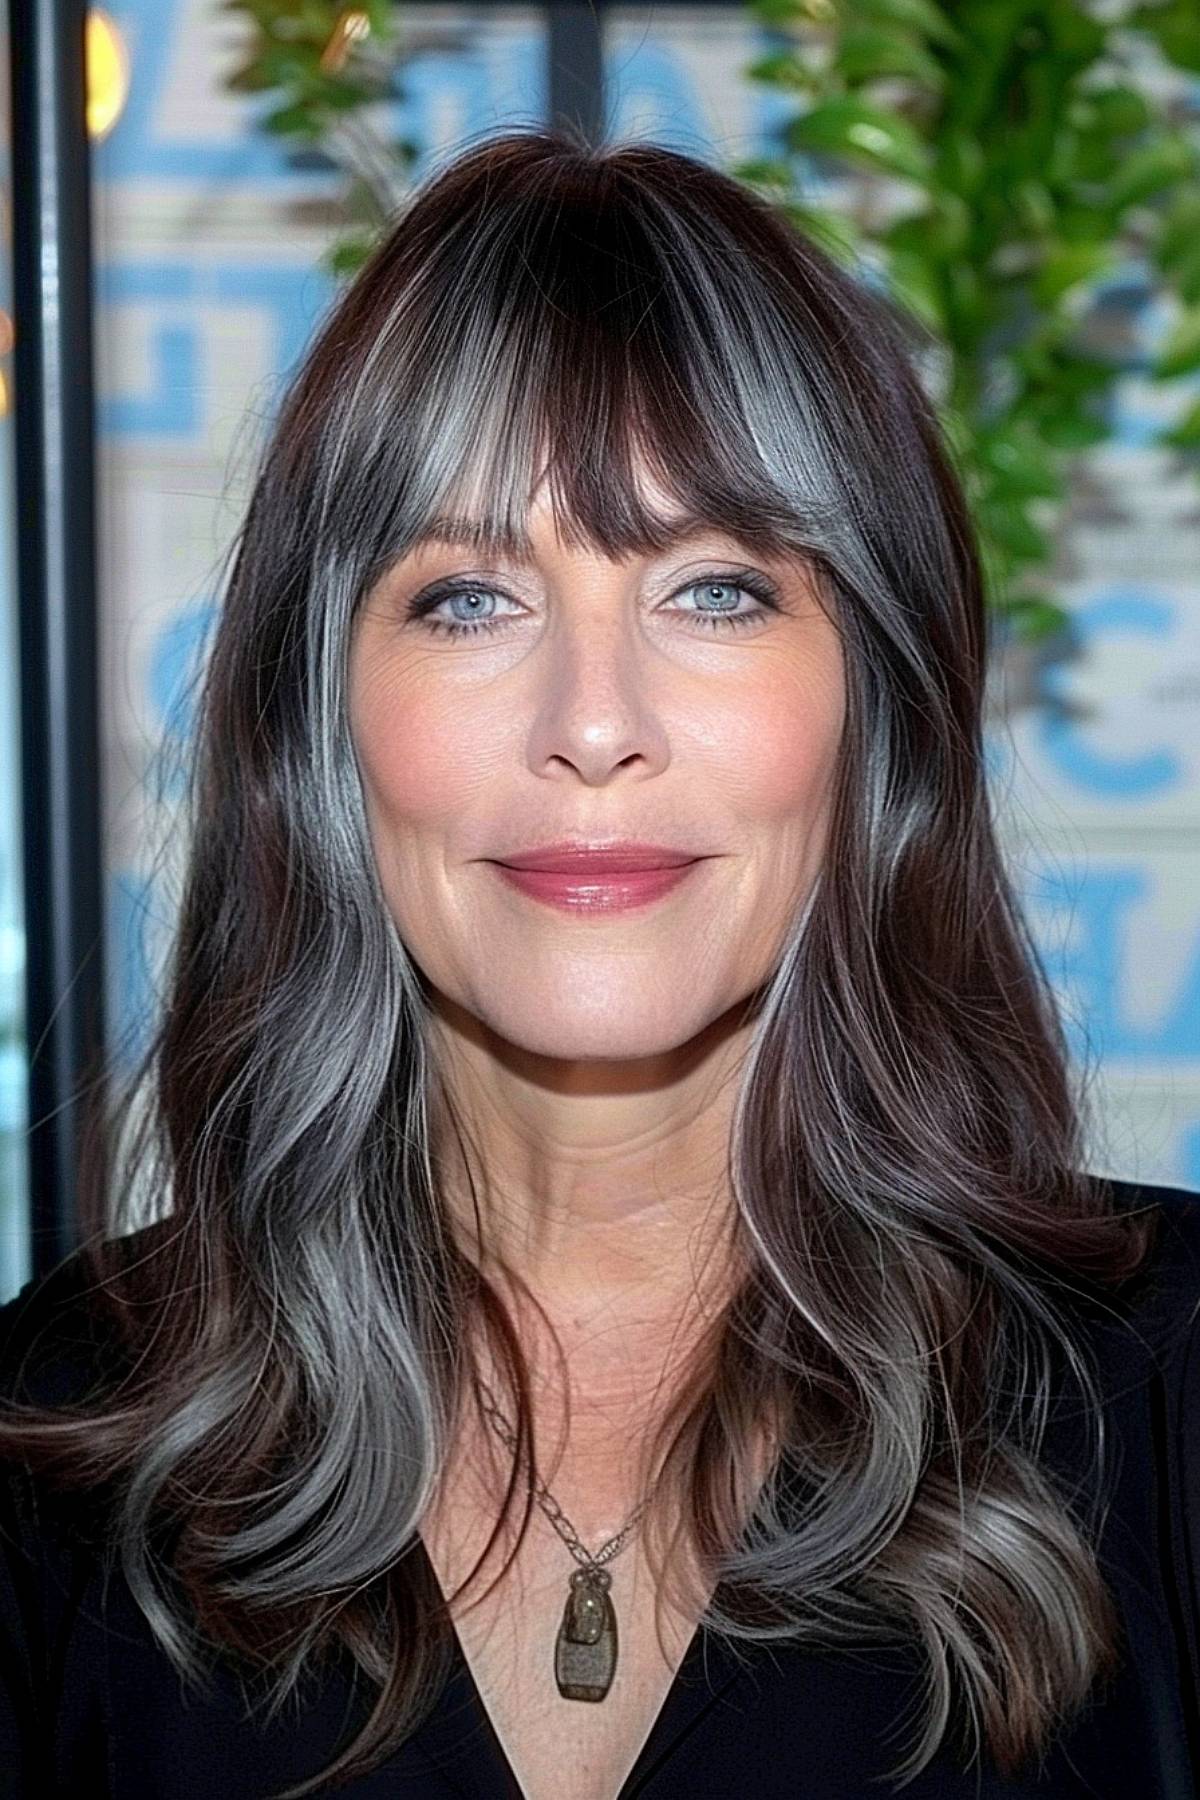 Silver-haired woman with modern bangs.  She gives a youthful look befitting her long face, which is over 50 years old.